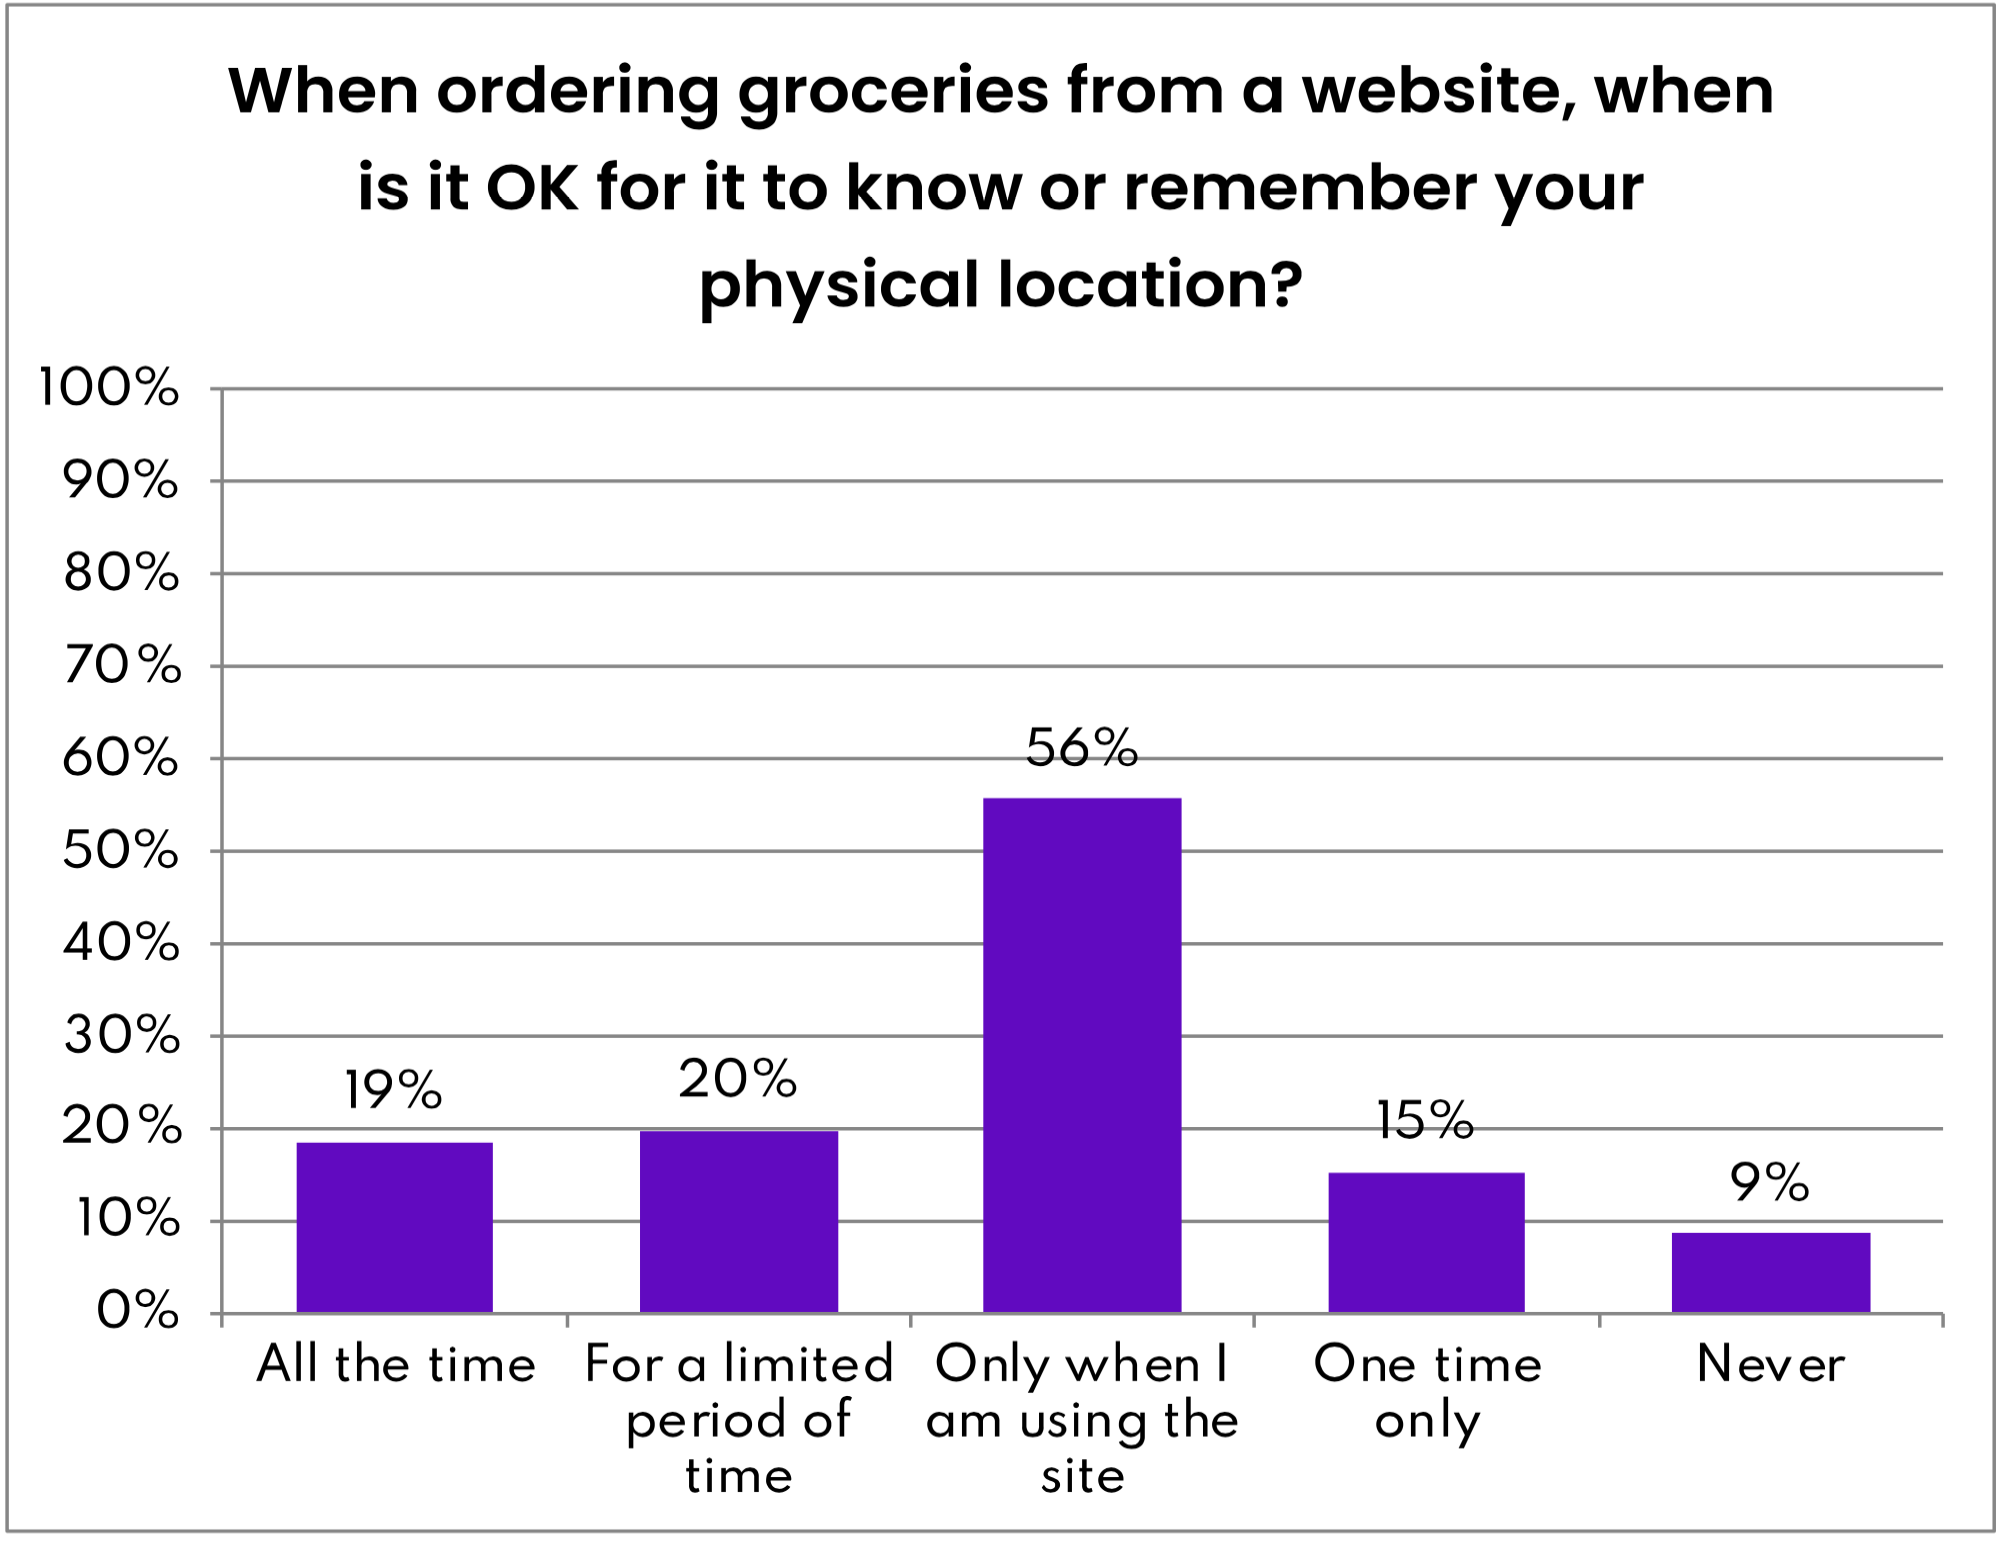 Figure 22- "OK to Remember Location?" Ordering Groceries